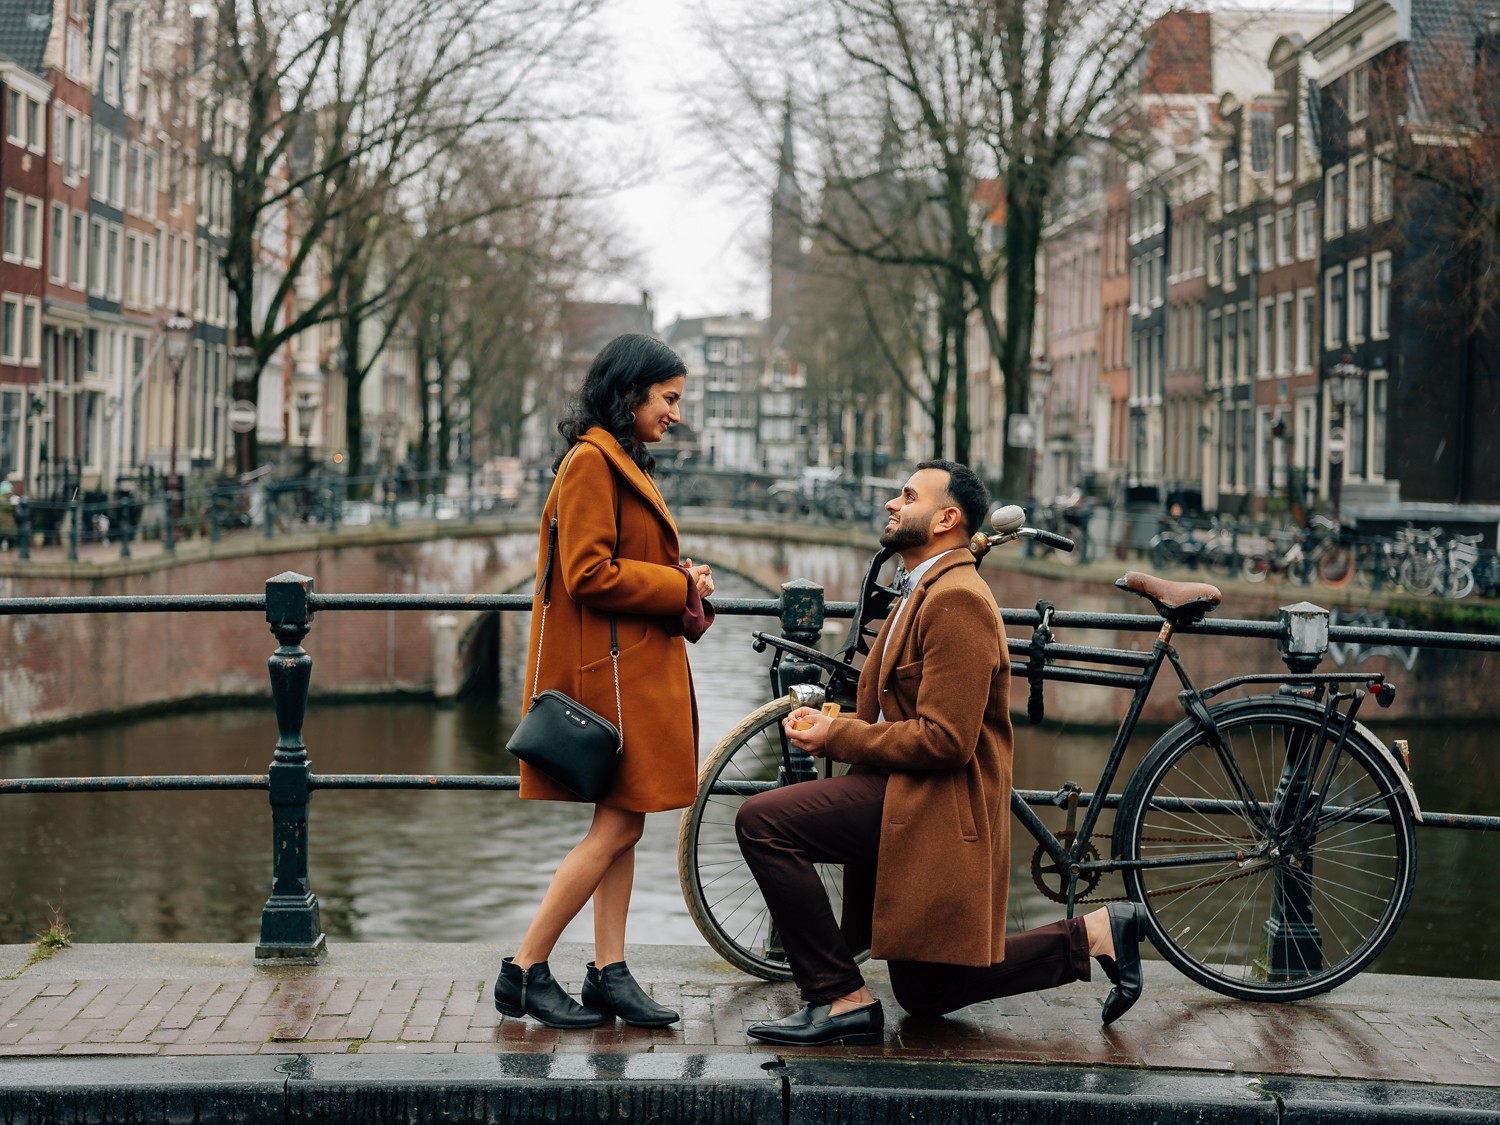 Proposal Photo Session in Amsterdam